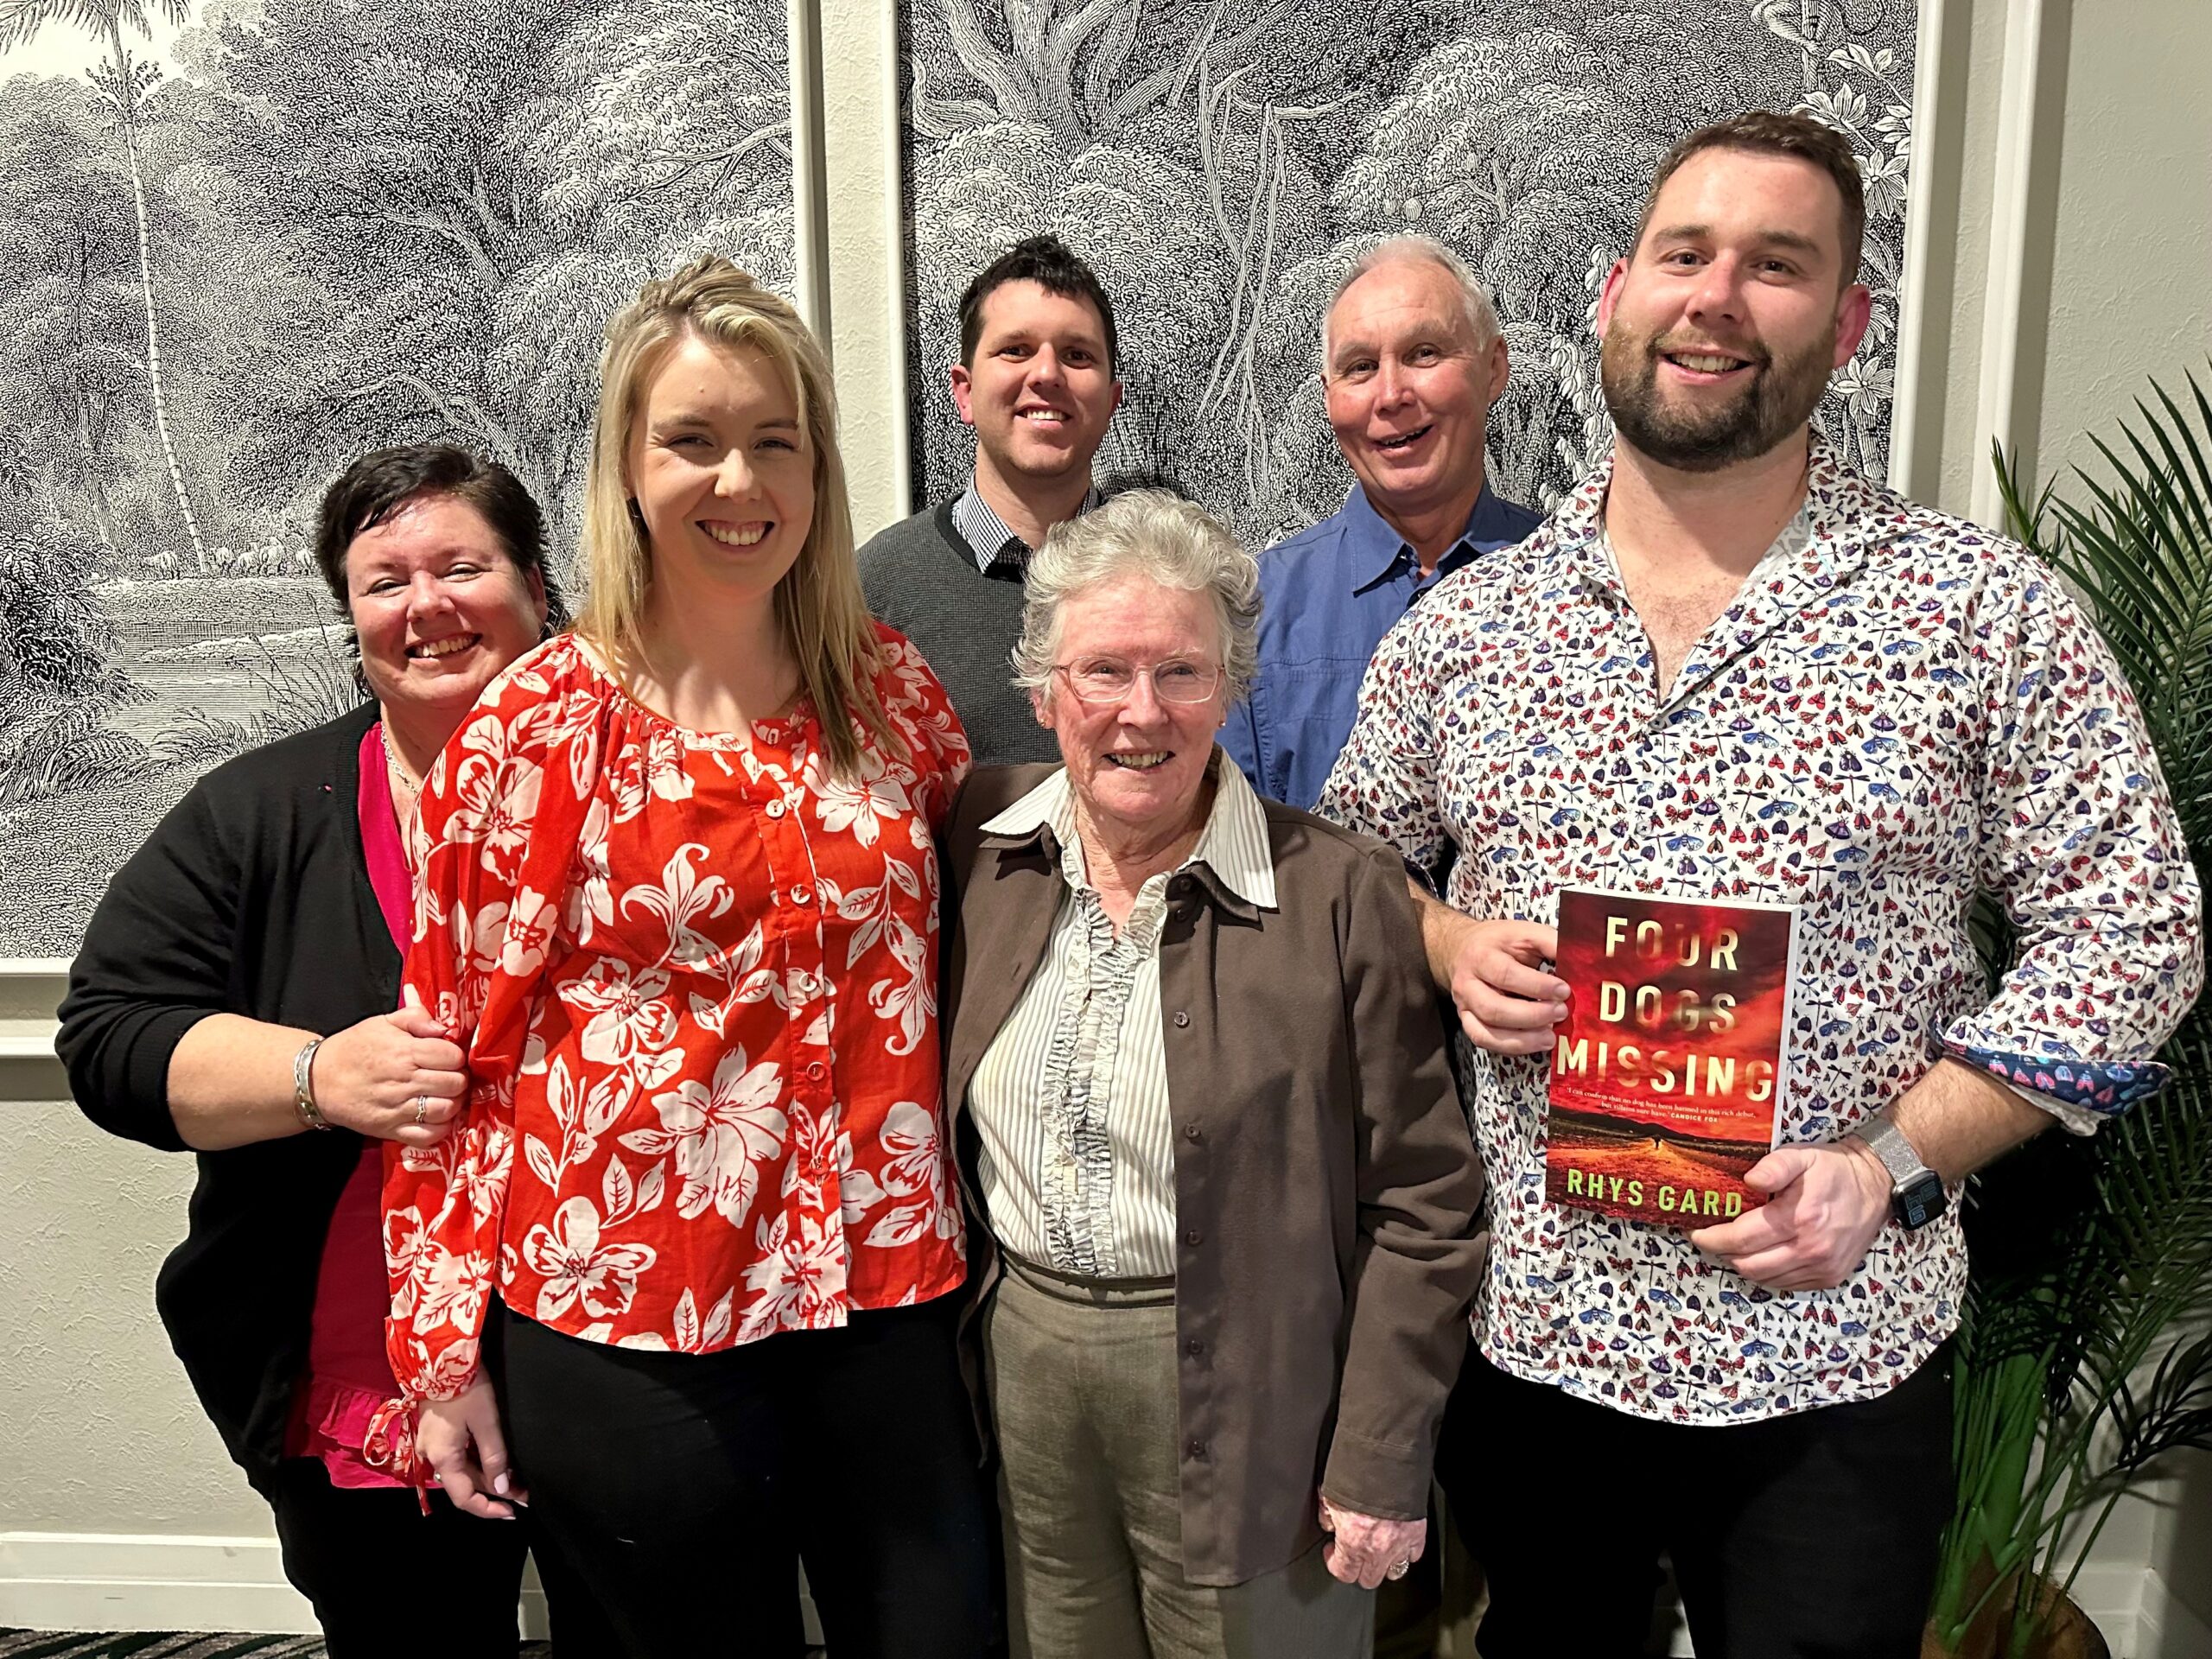 Debut book launch a sell-out